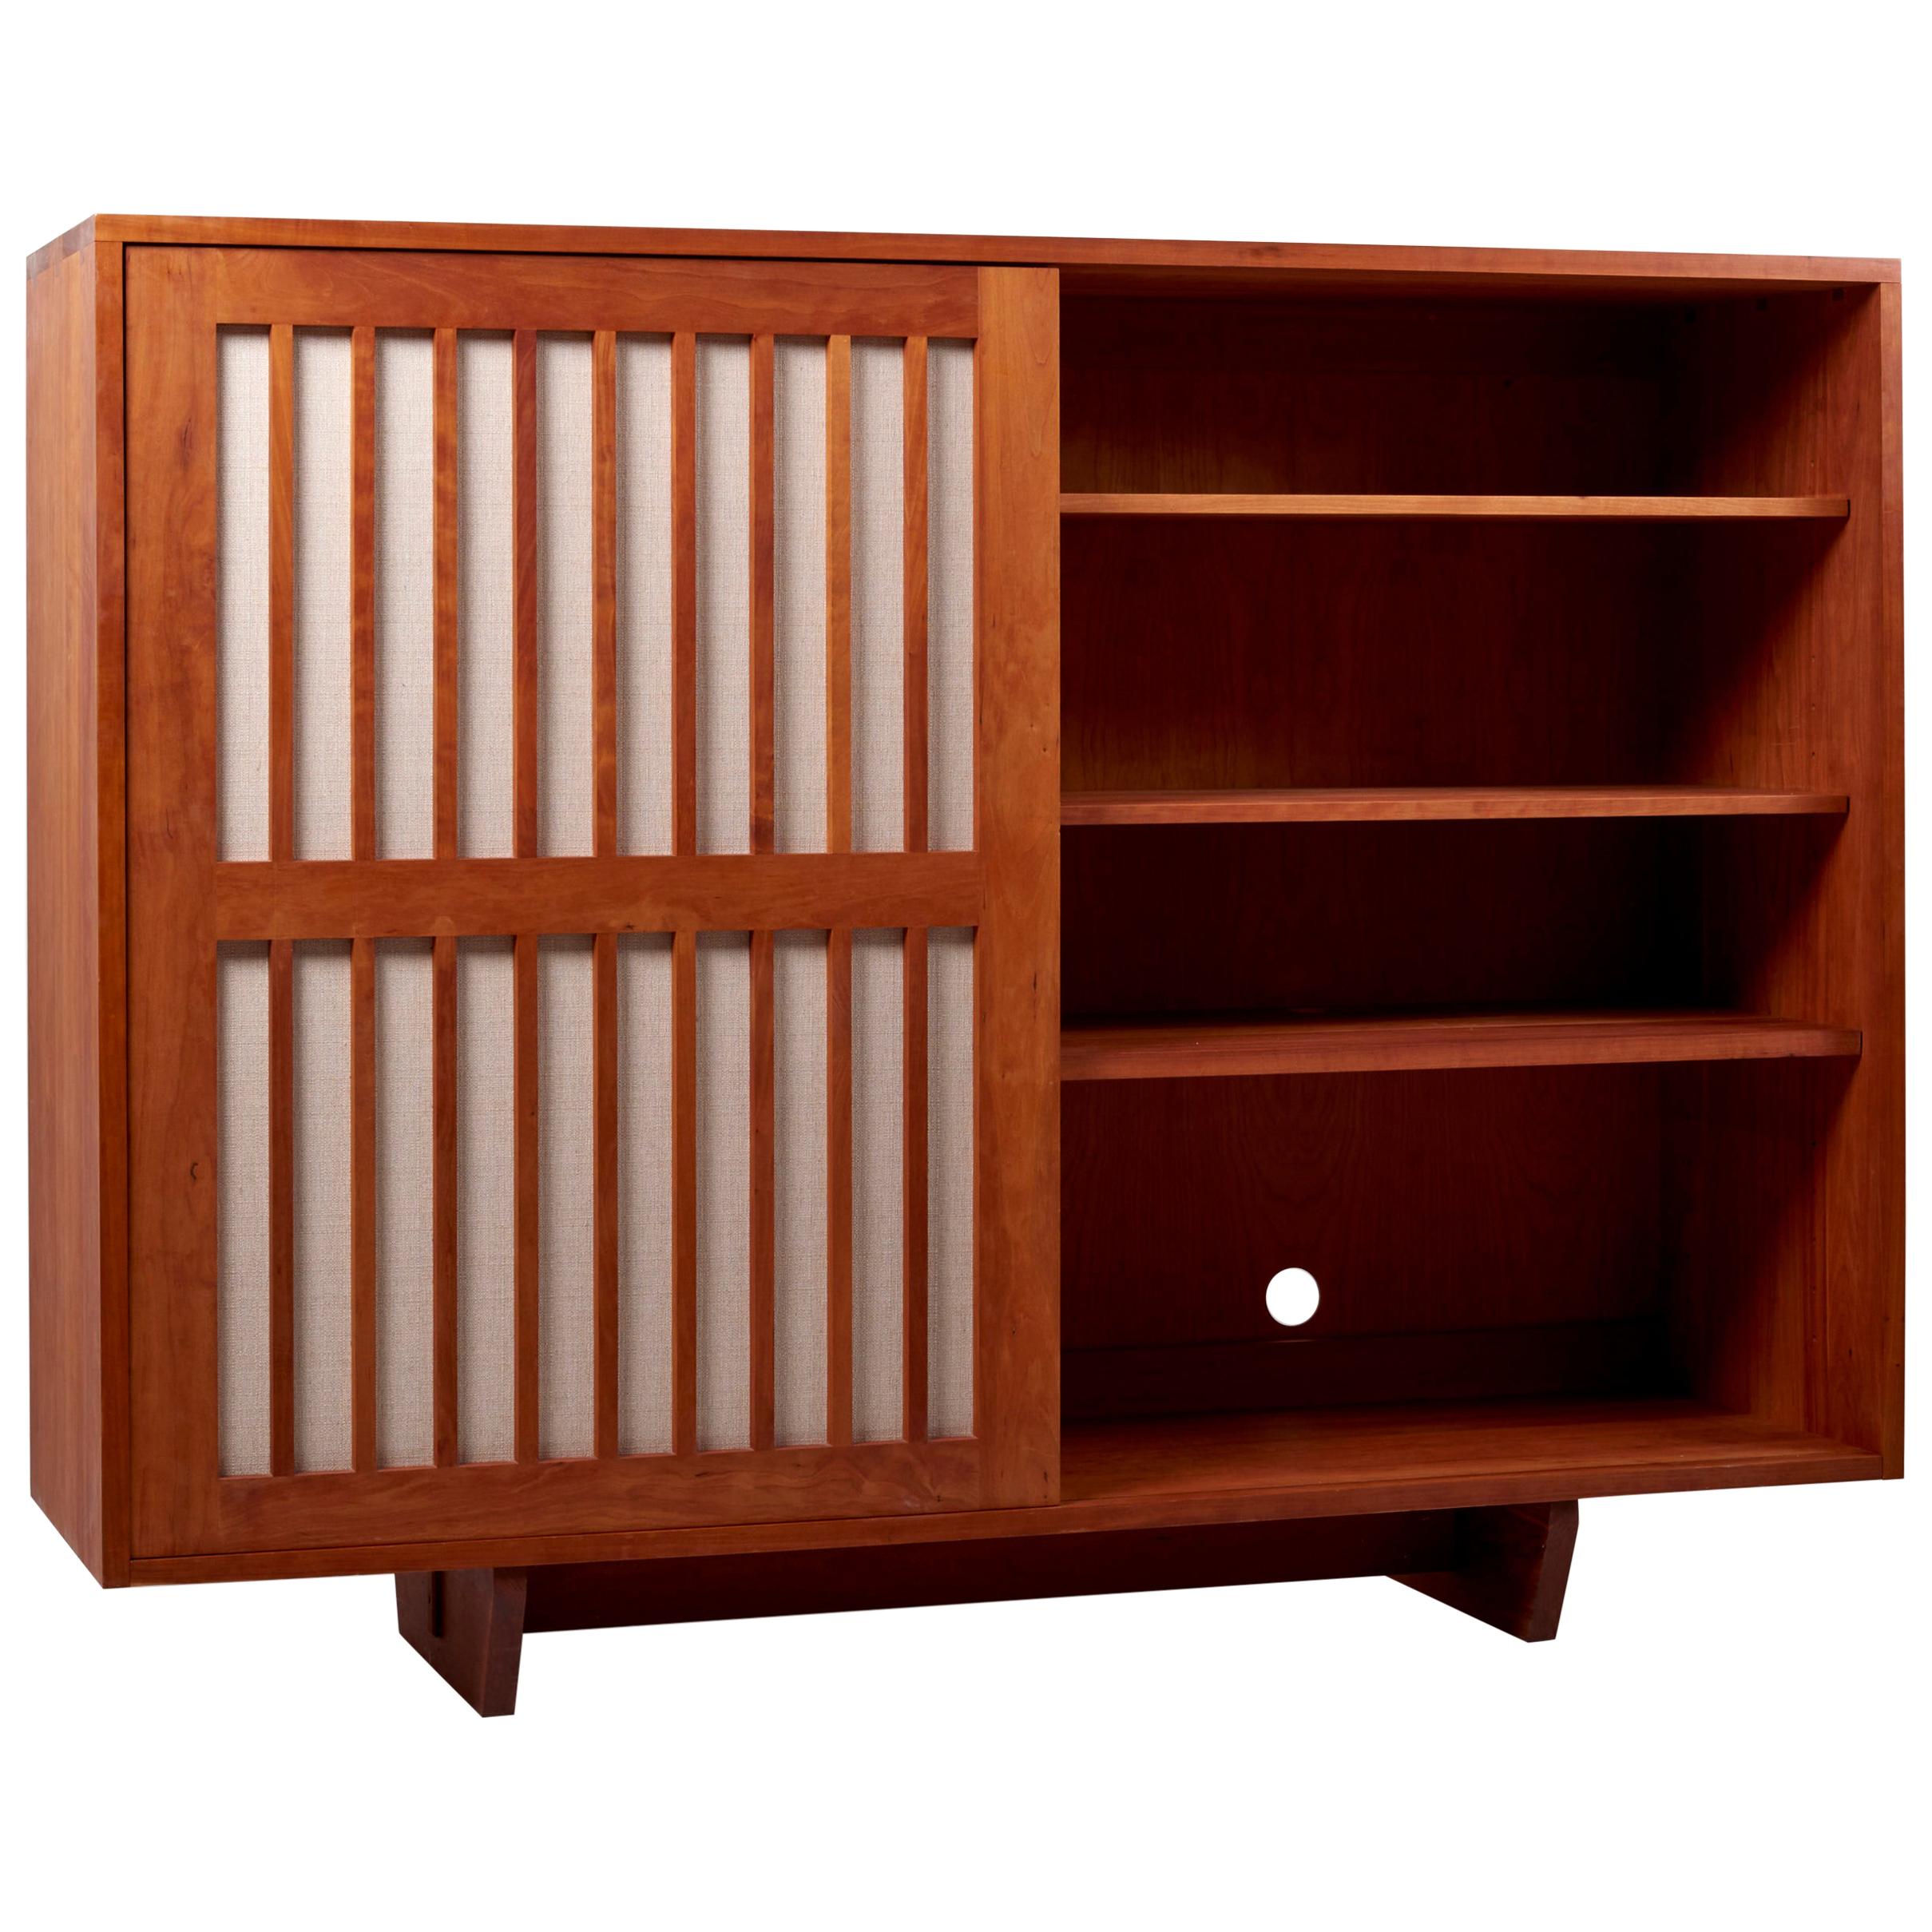 Studio Craft Cabinet by Arden Riddle, US, 1960s For Sale